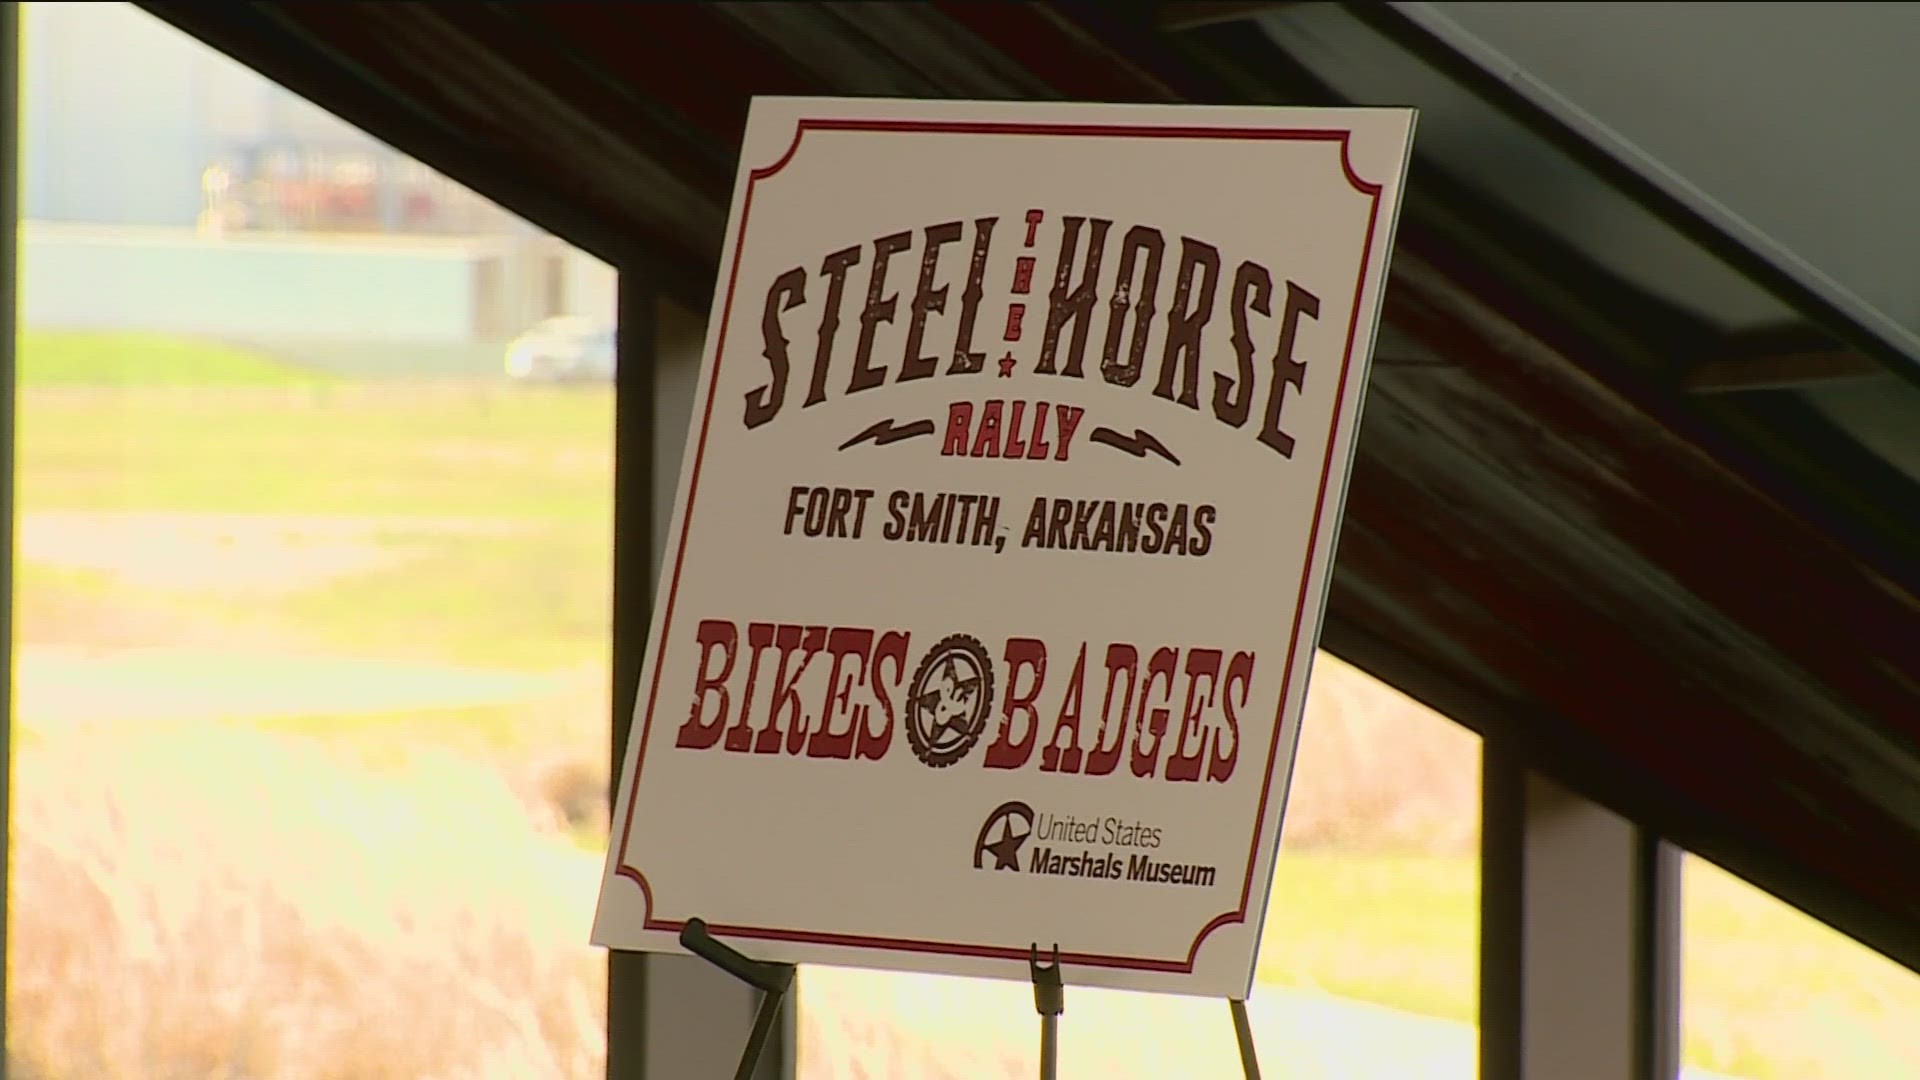 "We came up with a way to tie in the history of the marshals, Fort Smith, and some of the history of motorcycles," Dennis Snow said.